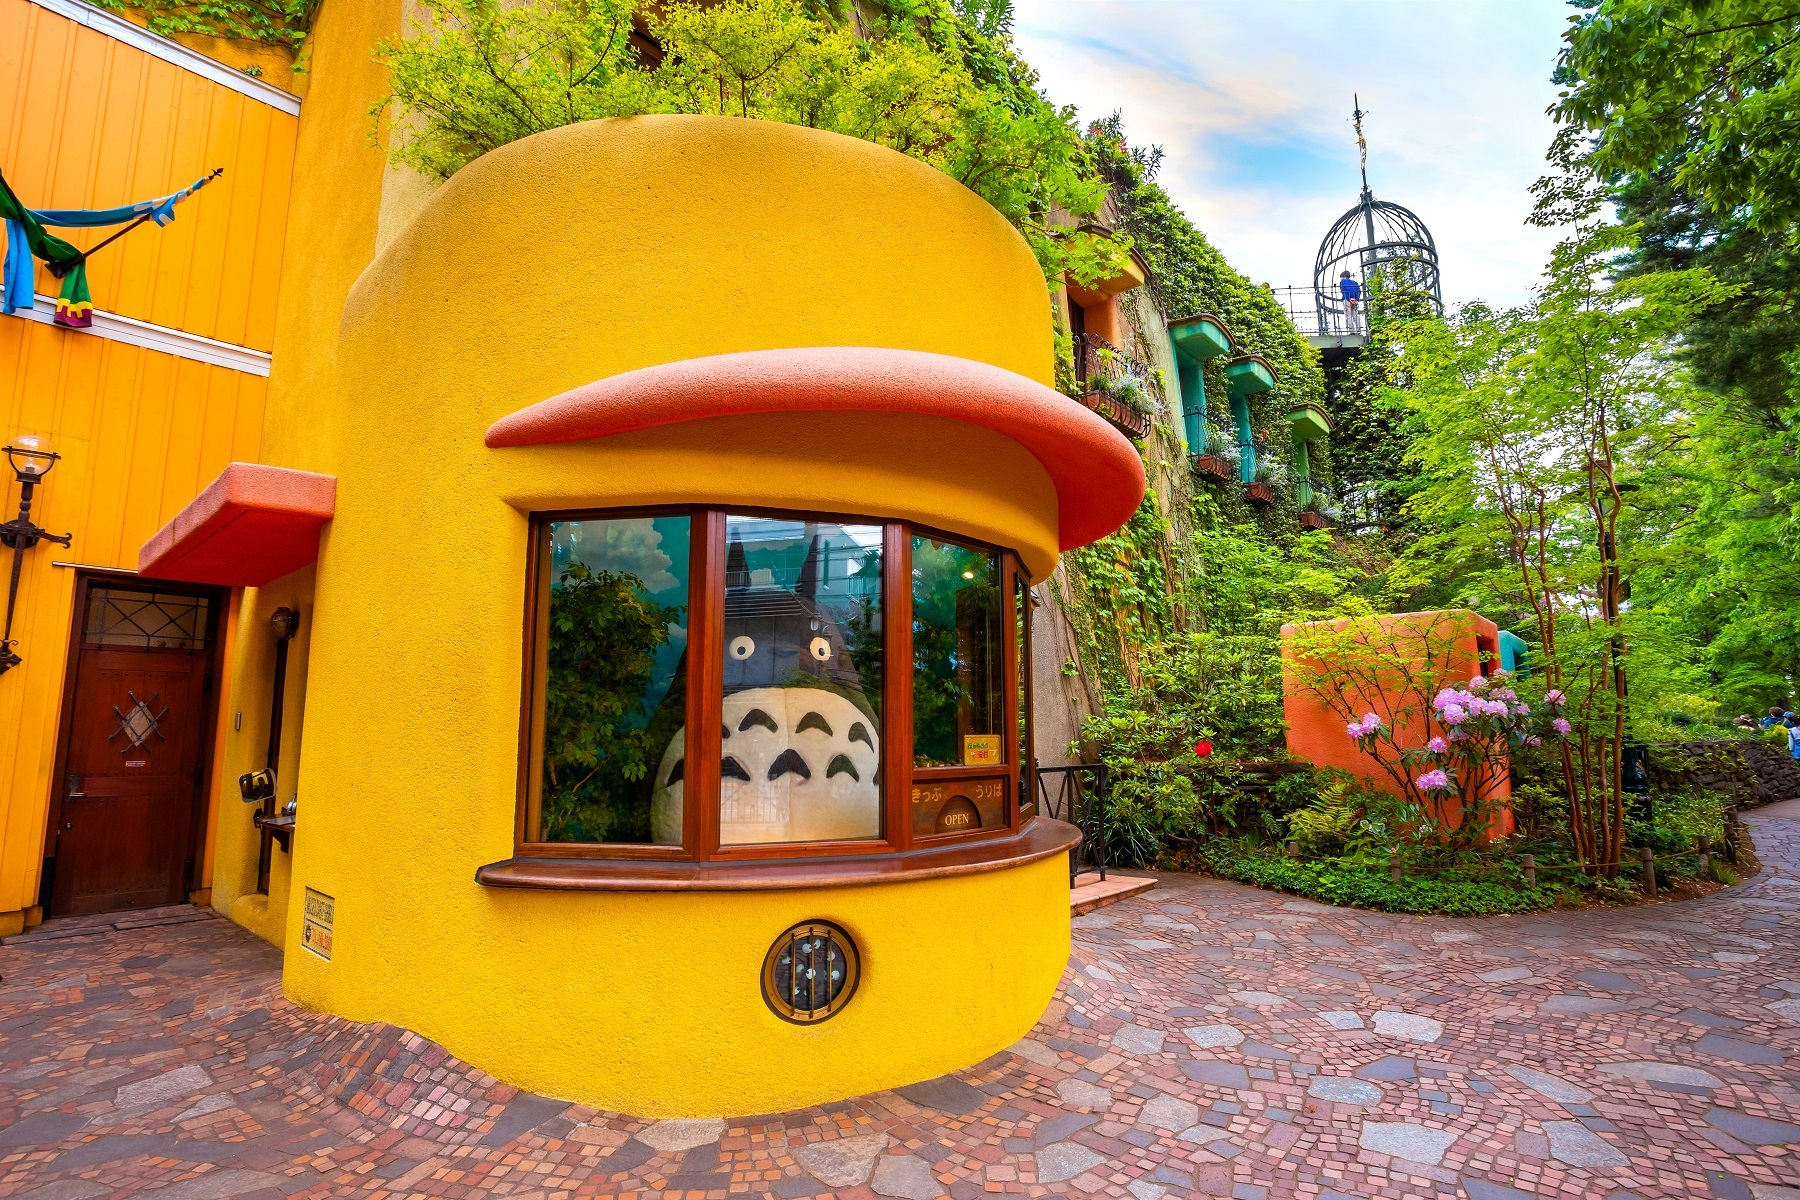 <p>In Inokashira Park in the Tokyo suburb of Mitaka, visitors will be greeted by a large Totoro from <em>My Neighbour Totoro</em>.</p><p>This is the entrance to the <a href="https://www.ghibli-museum.jp/en/welcome/">Ghibli Museum</a>, a wonderland of gardens, exhibition spaces and artwork from Studio Ghibli’s films. </p><p>Whether you’re a fan of the Oscar-winning animation studio or just want to explore the museum and its surroundings, a visit to this serene place is a great day out for children (and adults) of all ages. </p>